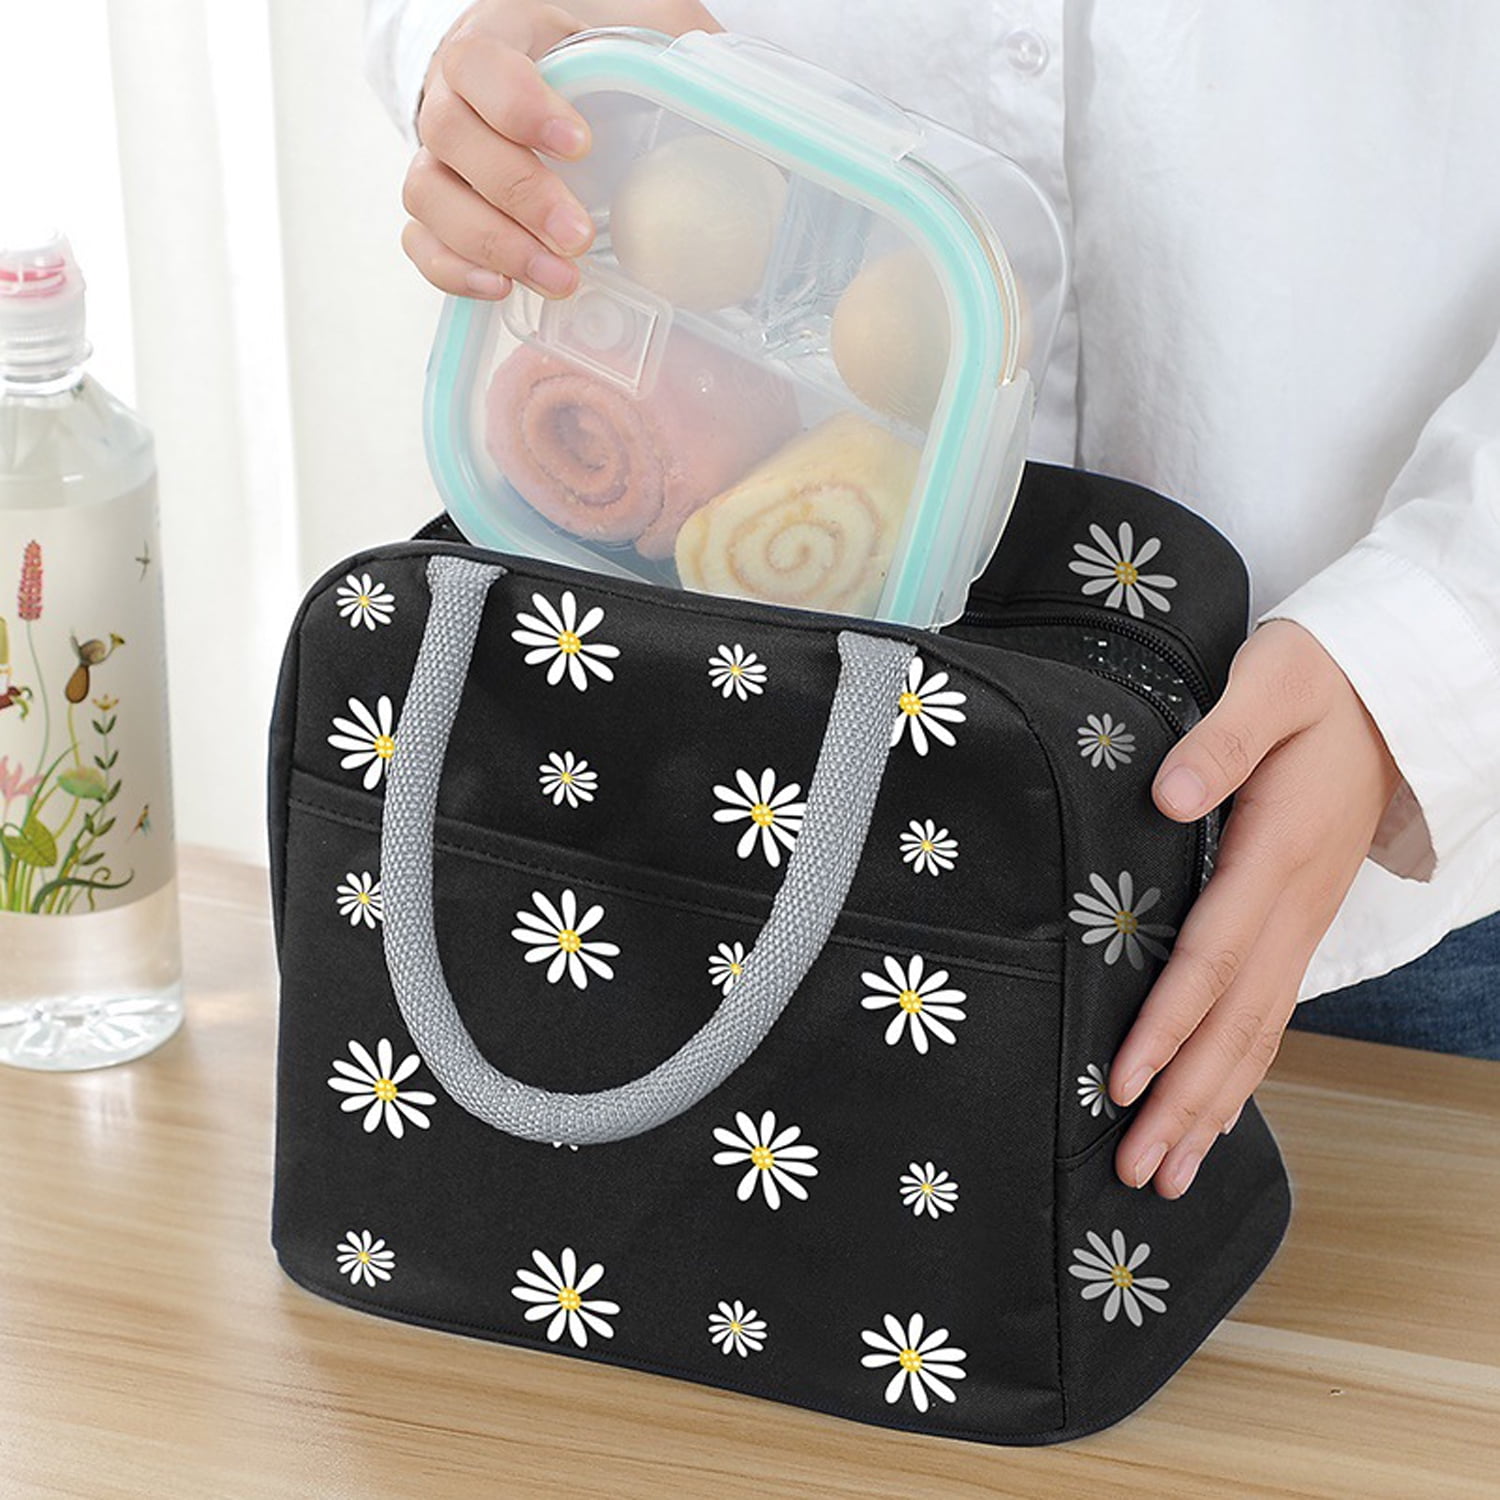 Insulated Lunch Box With Soft Padded Handles - Black With White Daisy, 1 -  Kroger